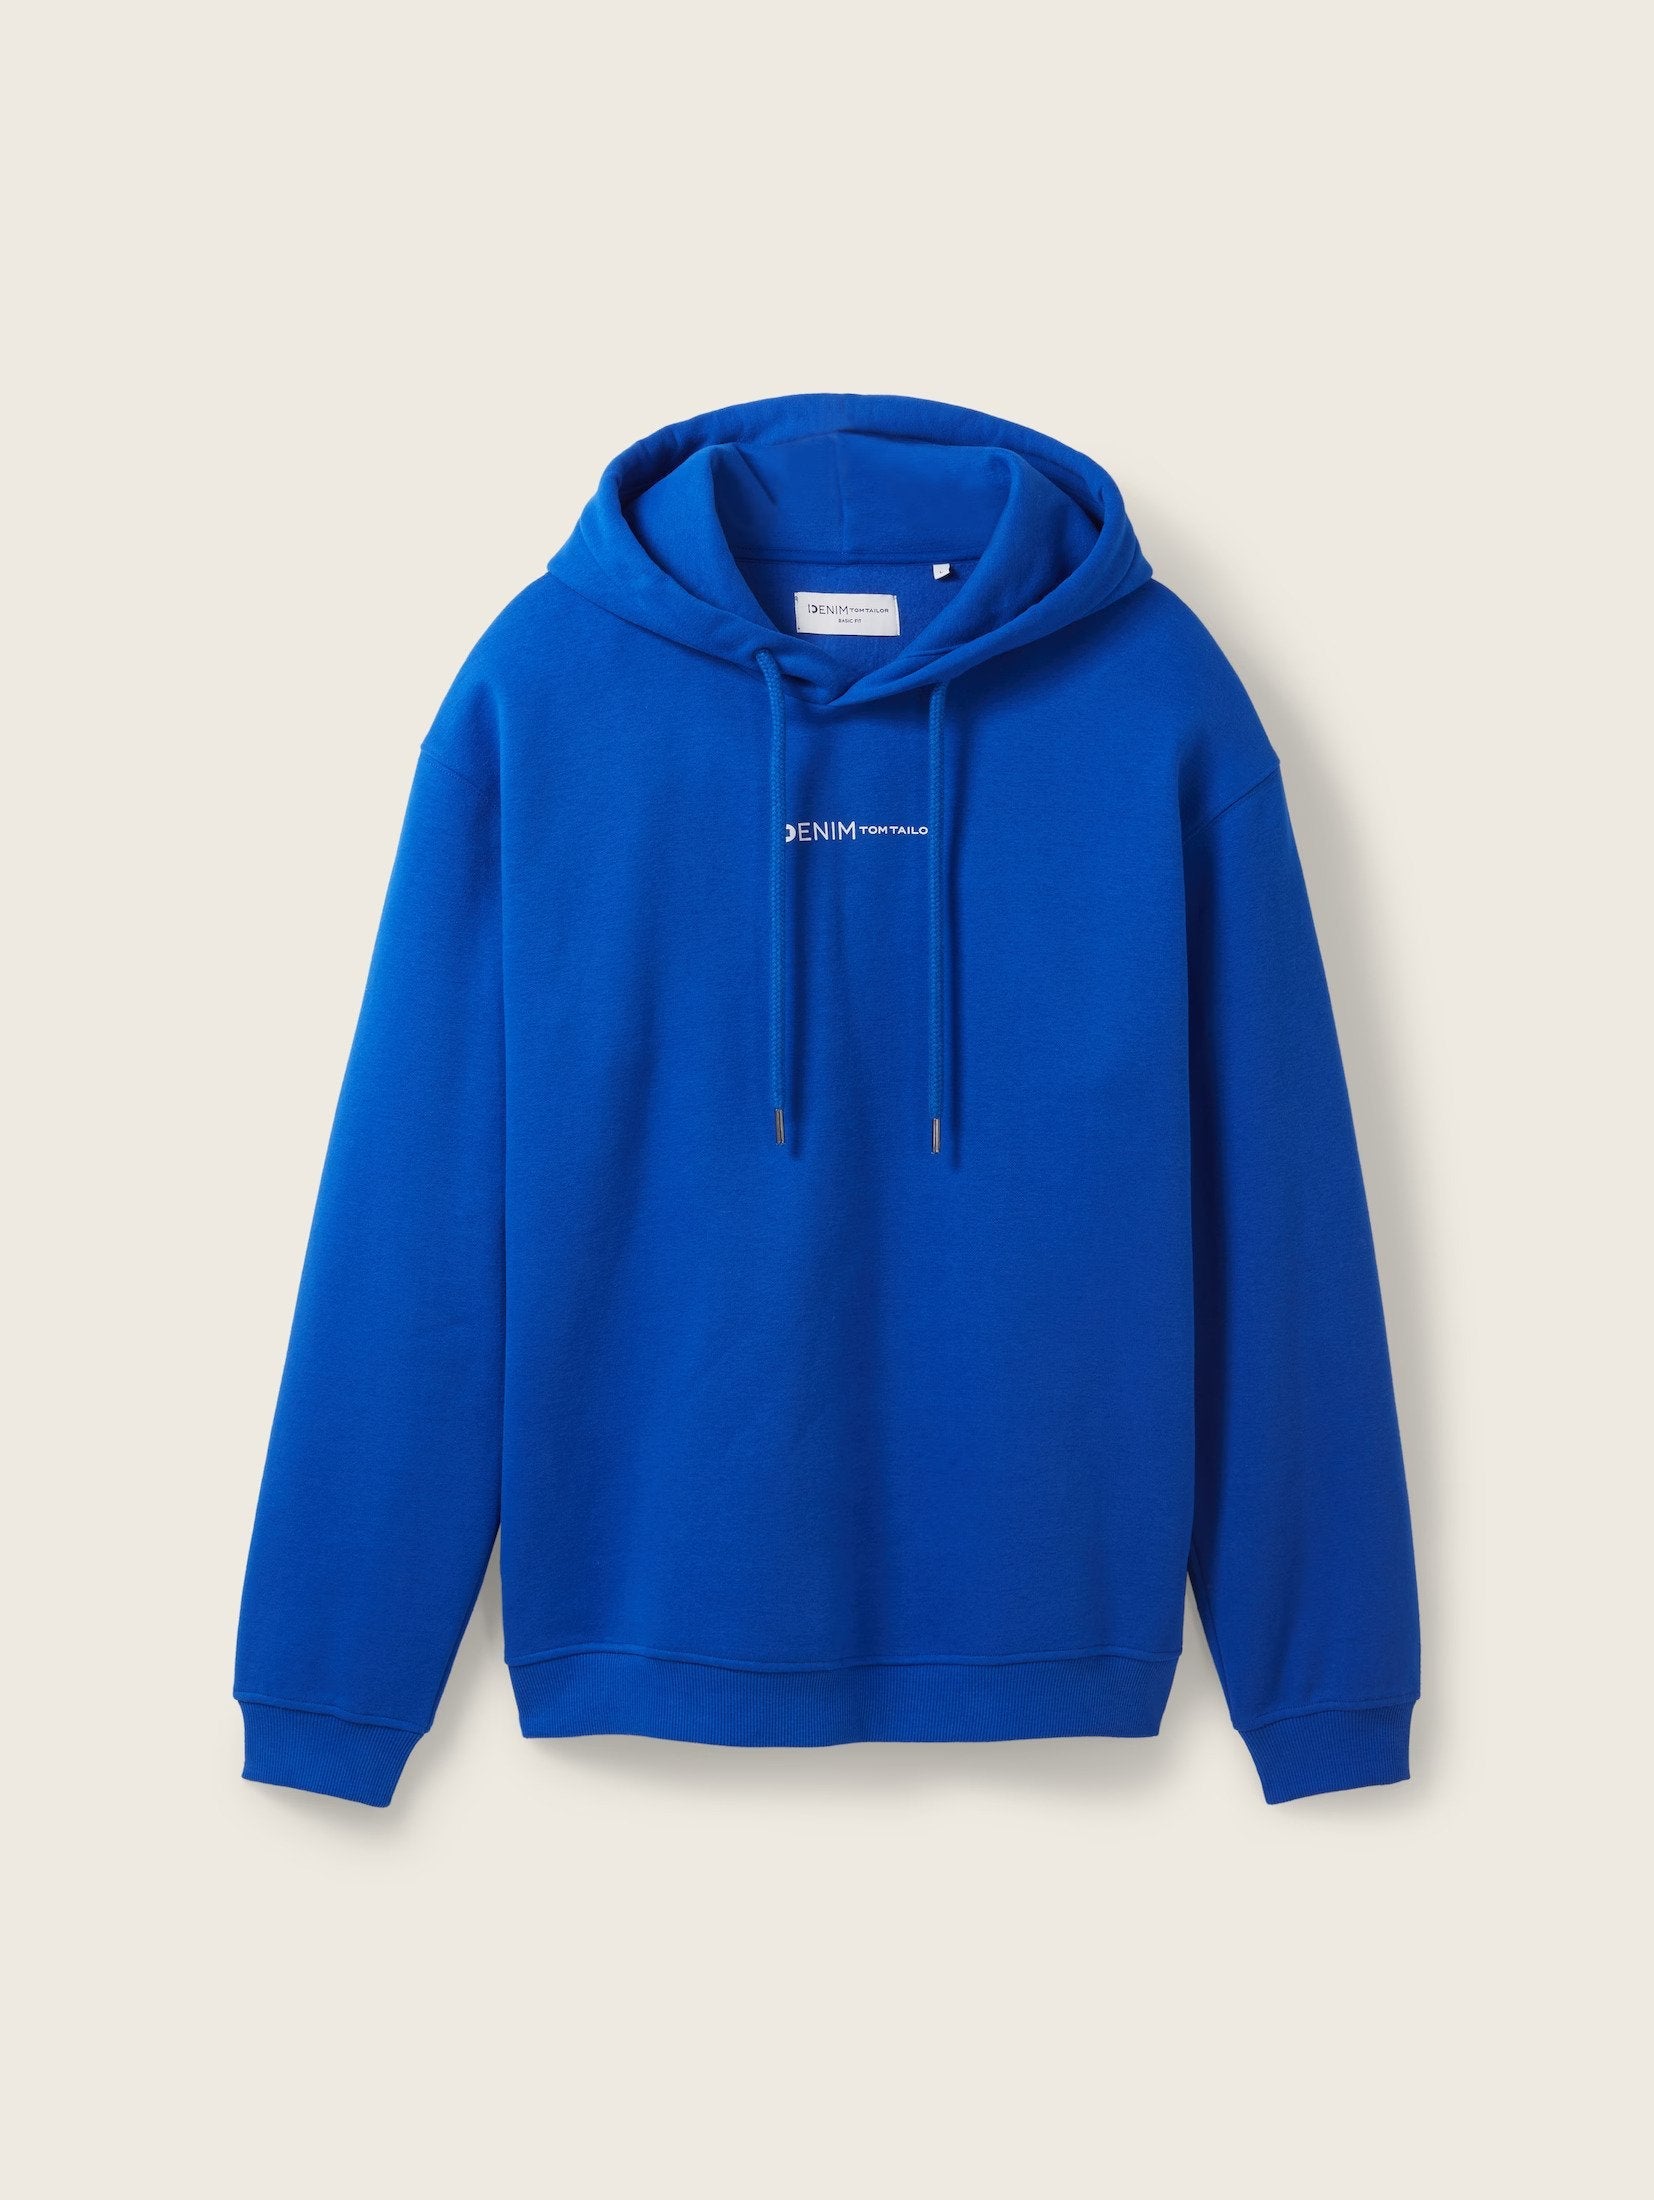 Tom Tailor Text Print Blue Hoodie